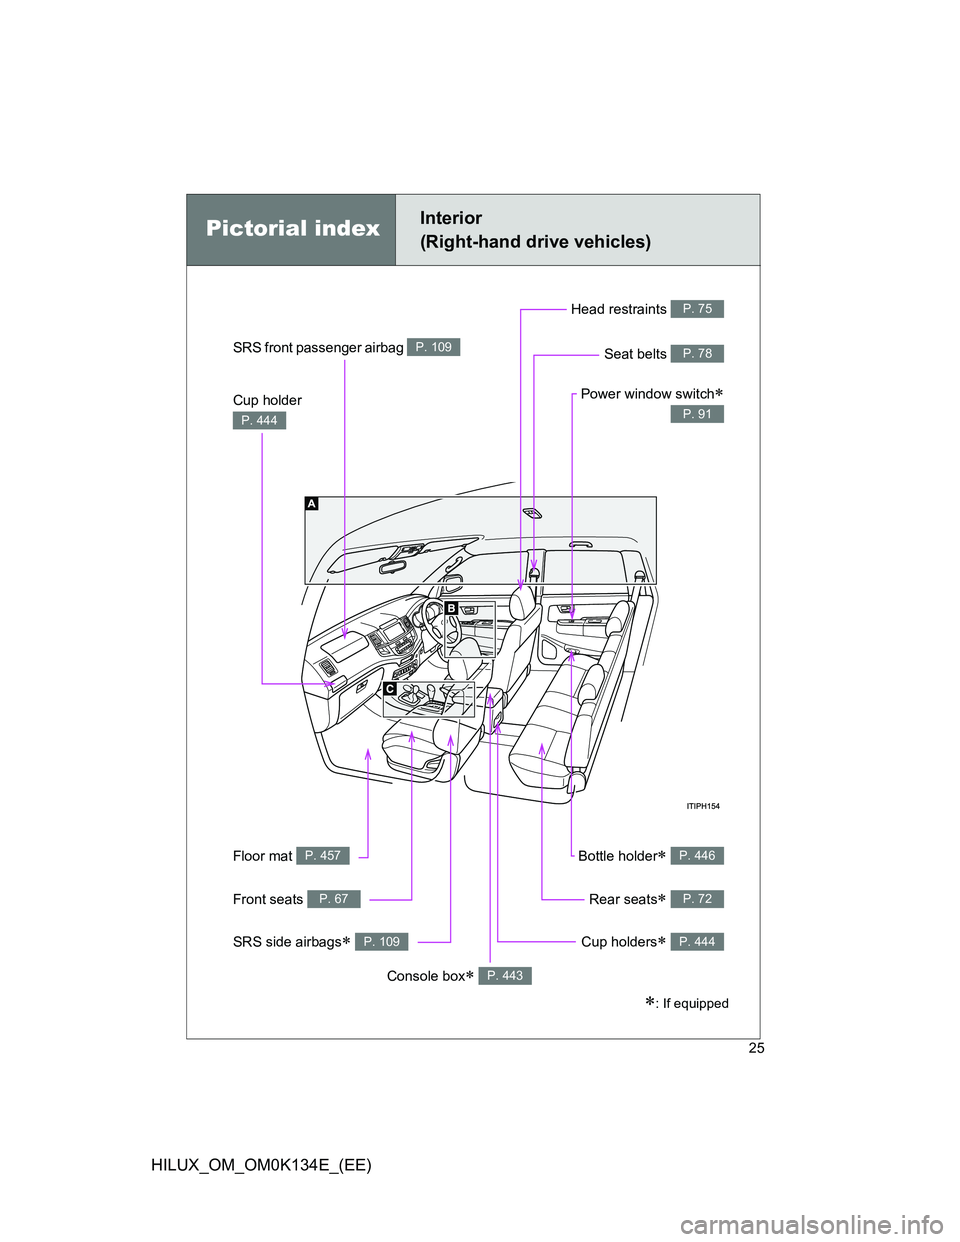 TOYOTA HILUX 2013  Owners Manual (in English) 25
HILUX_OM_OM0K134E_(EE)
Pictorial indexInterior 
(Right-hand drive vehicles)
Cup holder 
P. 444
Floor mat P. 457Bottle holder P. 446
SRS front passenger airbag P. 109
SRS side airbags P. 109
R